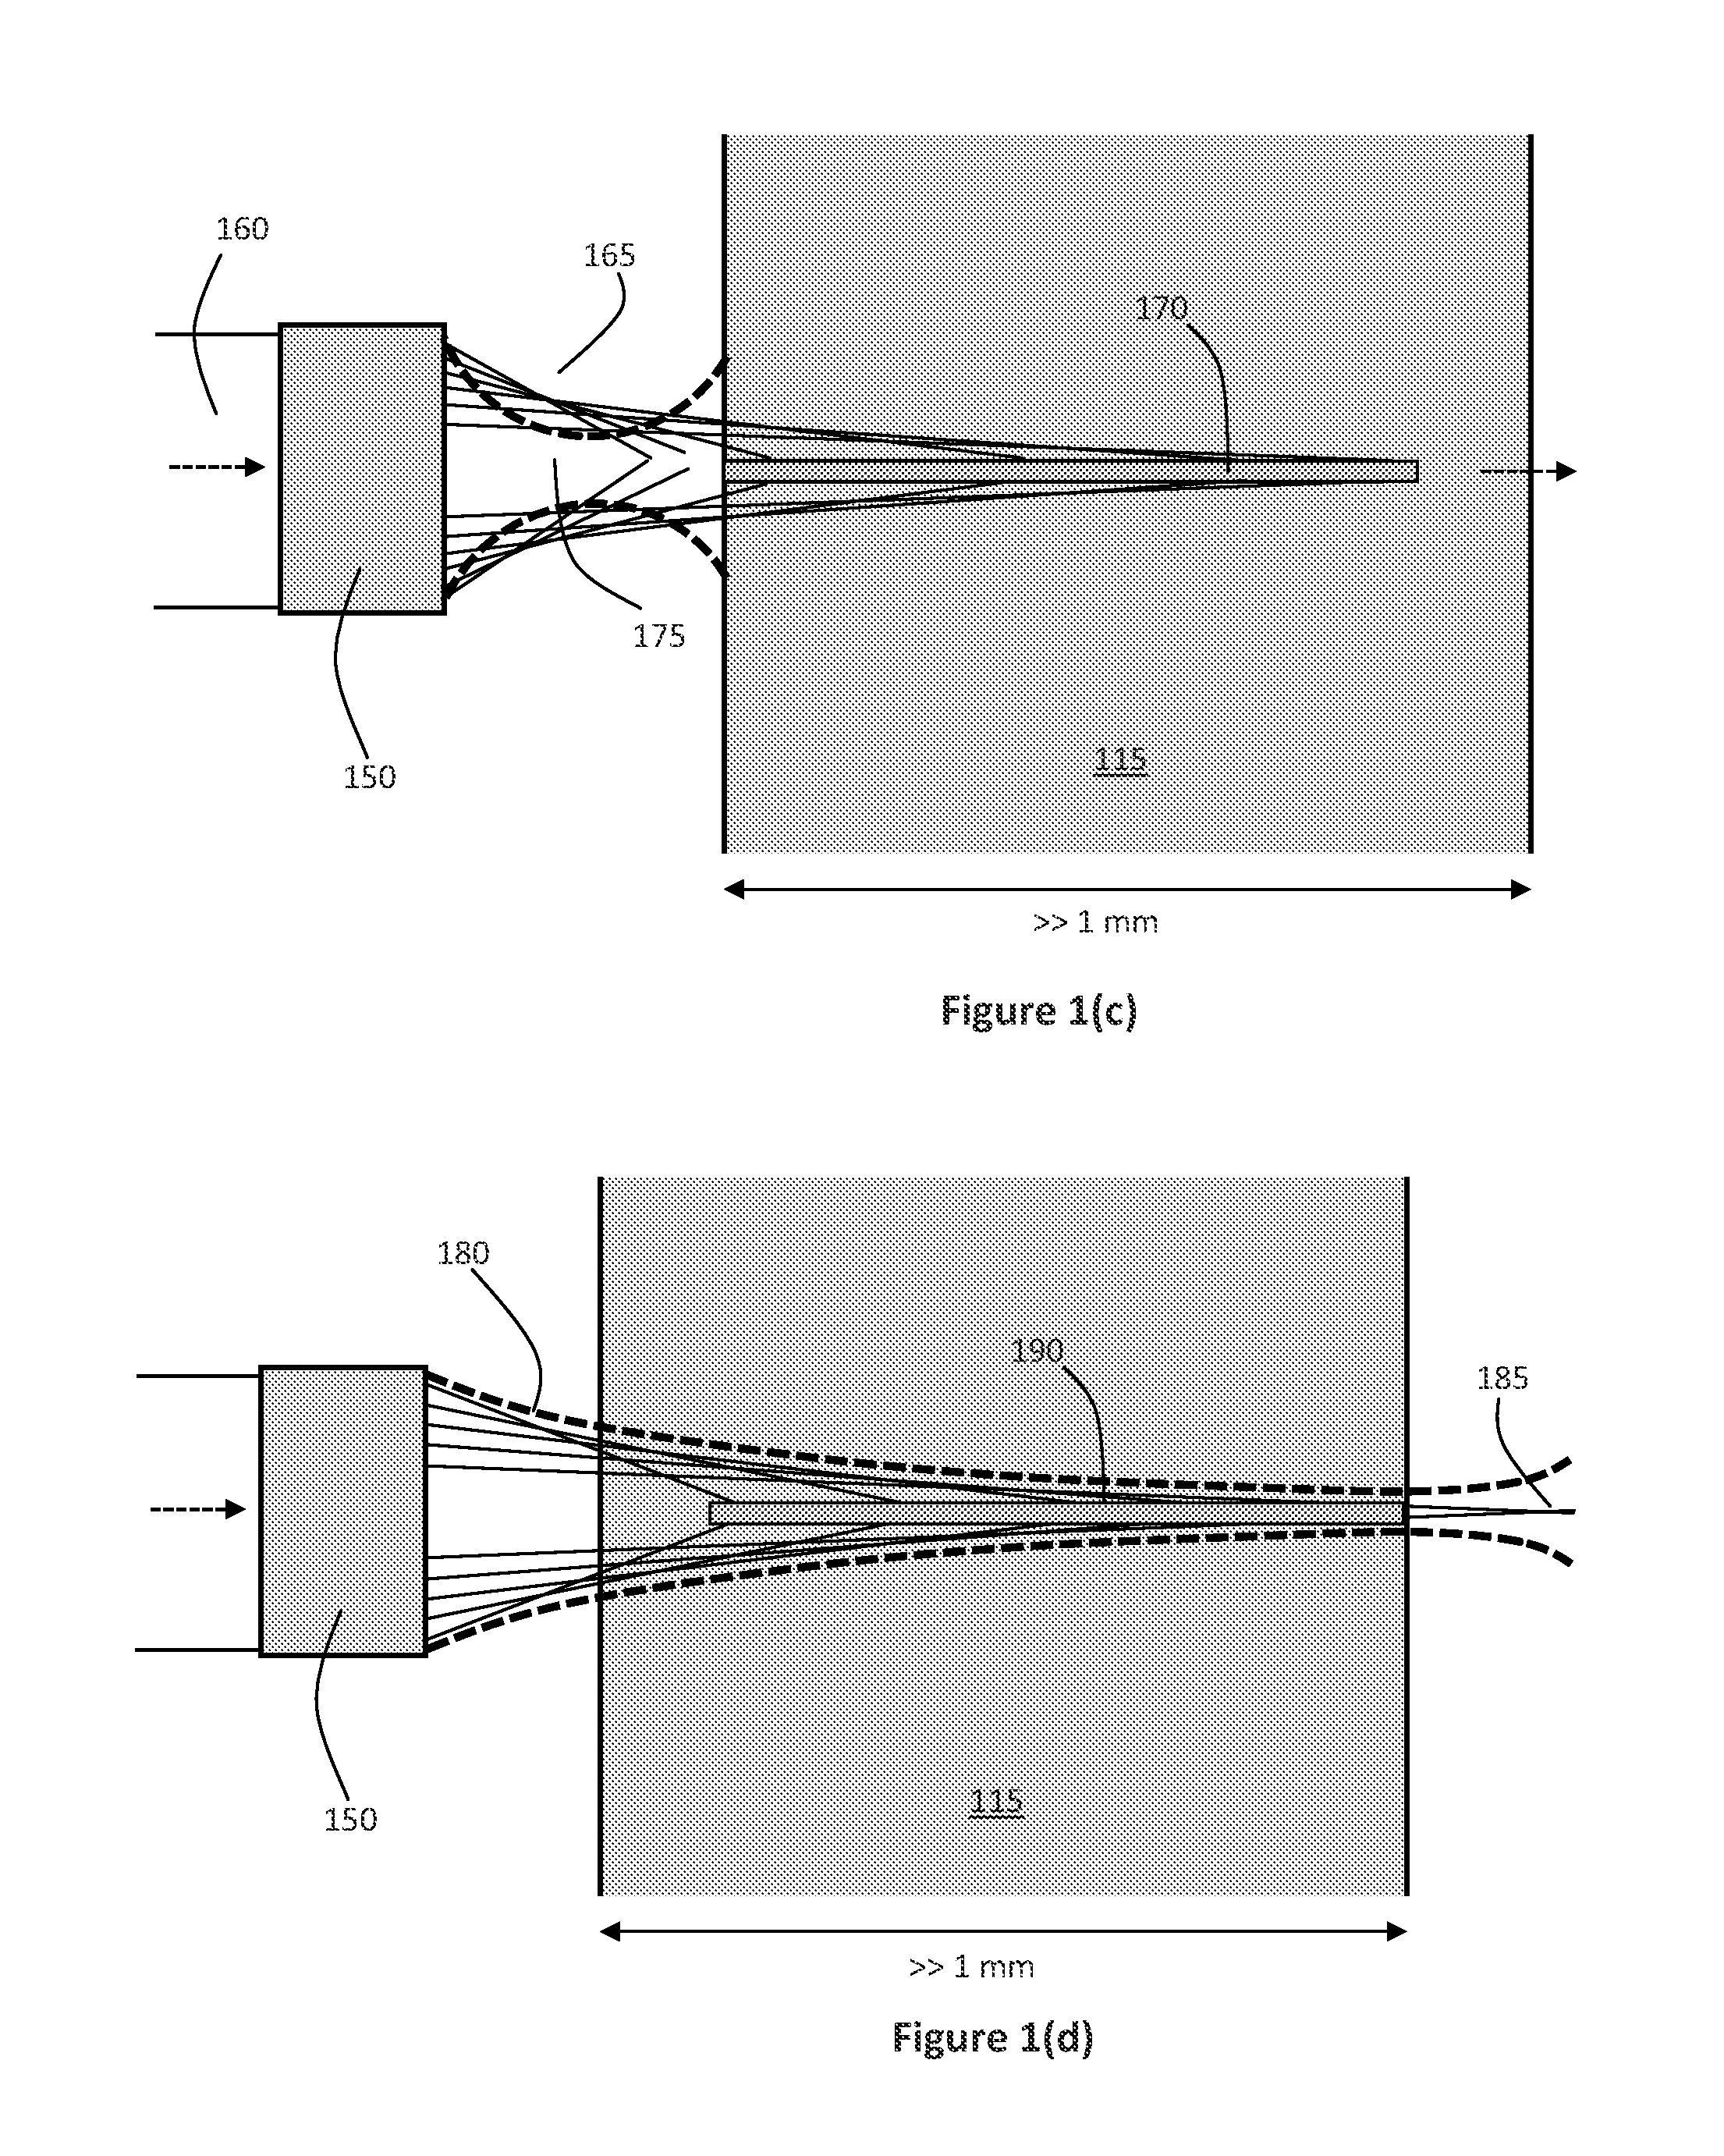 System for performing laser filamentation within transparent materials